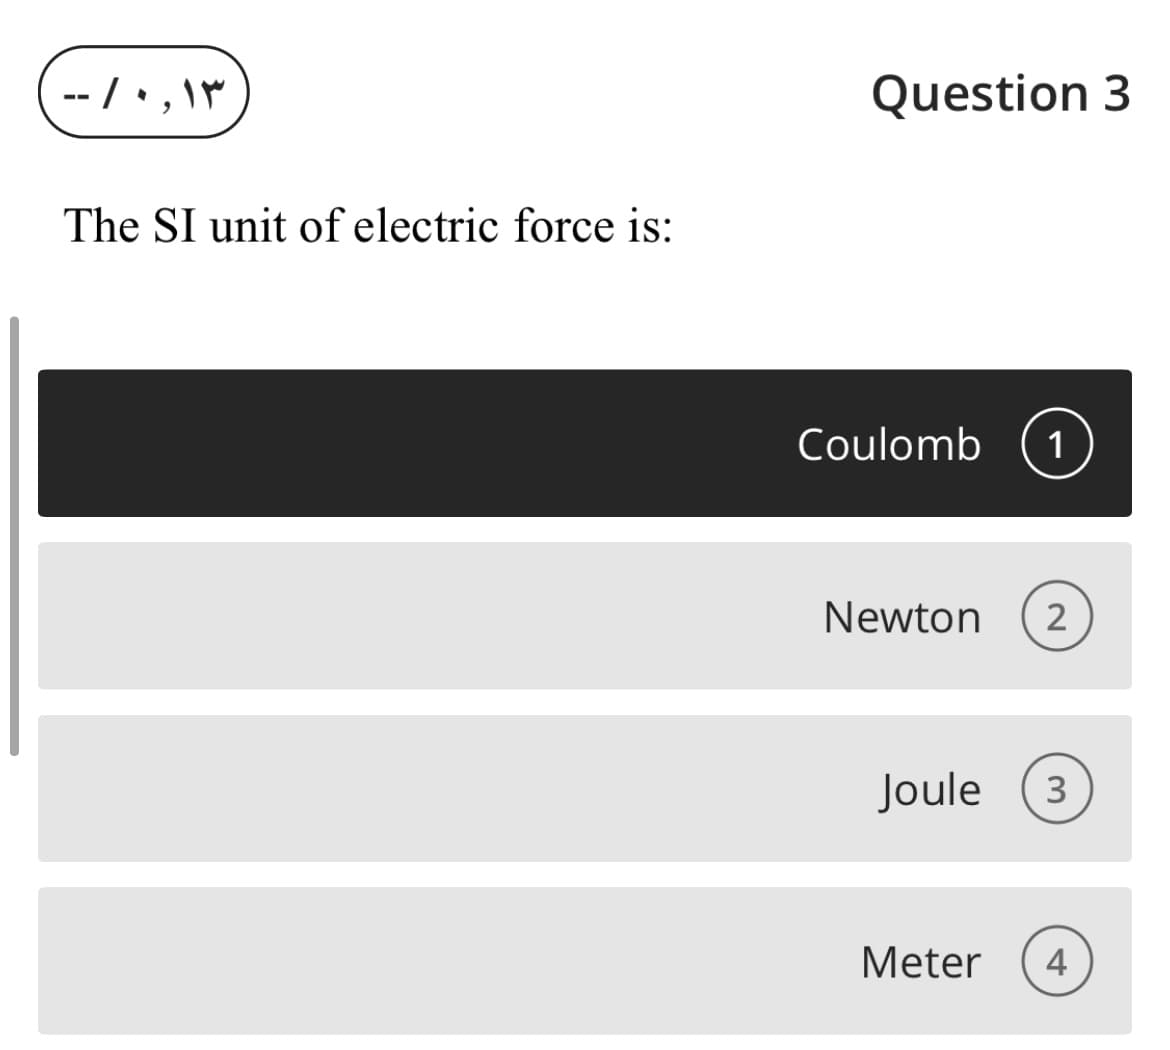 -- /•, \M
Question 3
The SI unit of electric force is:
Coulomb
1
Newton
2
Joule
3
Meter
4
